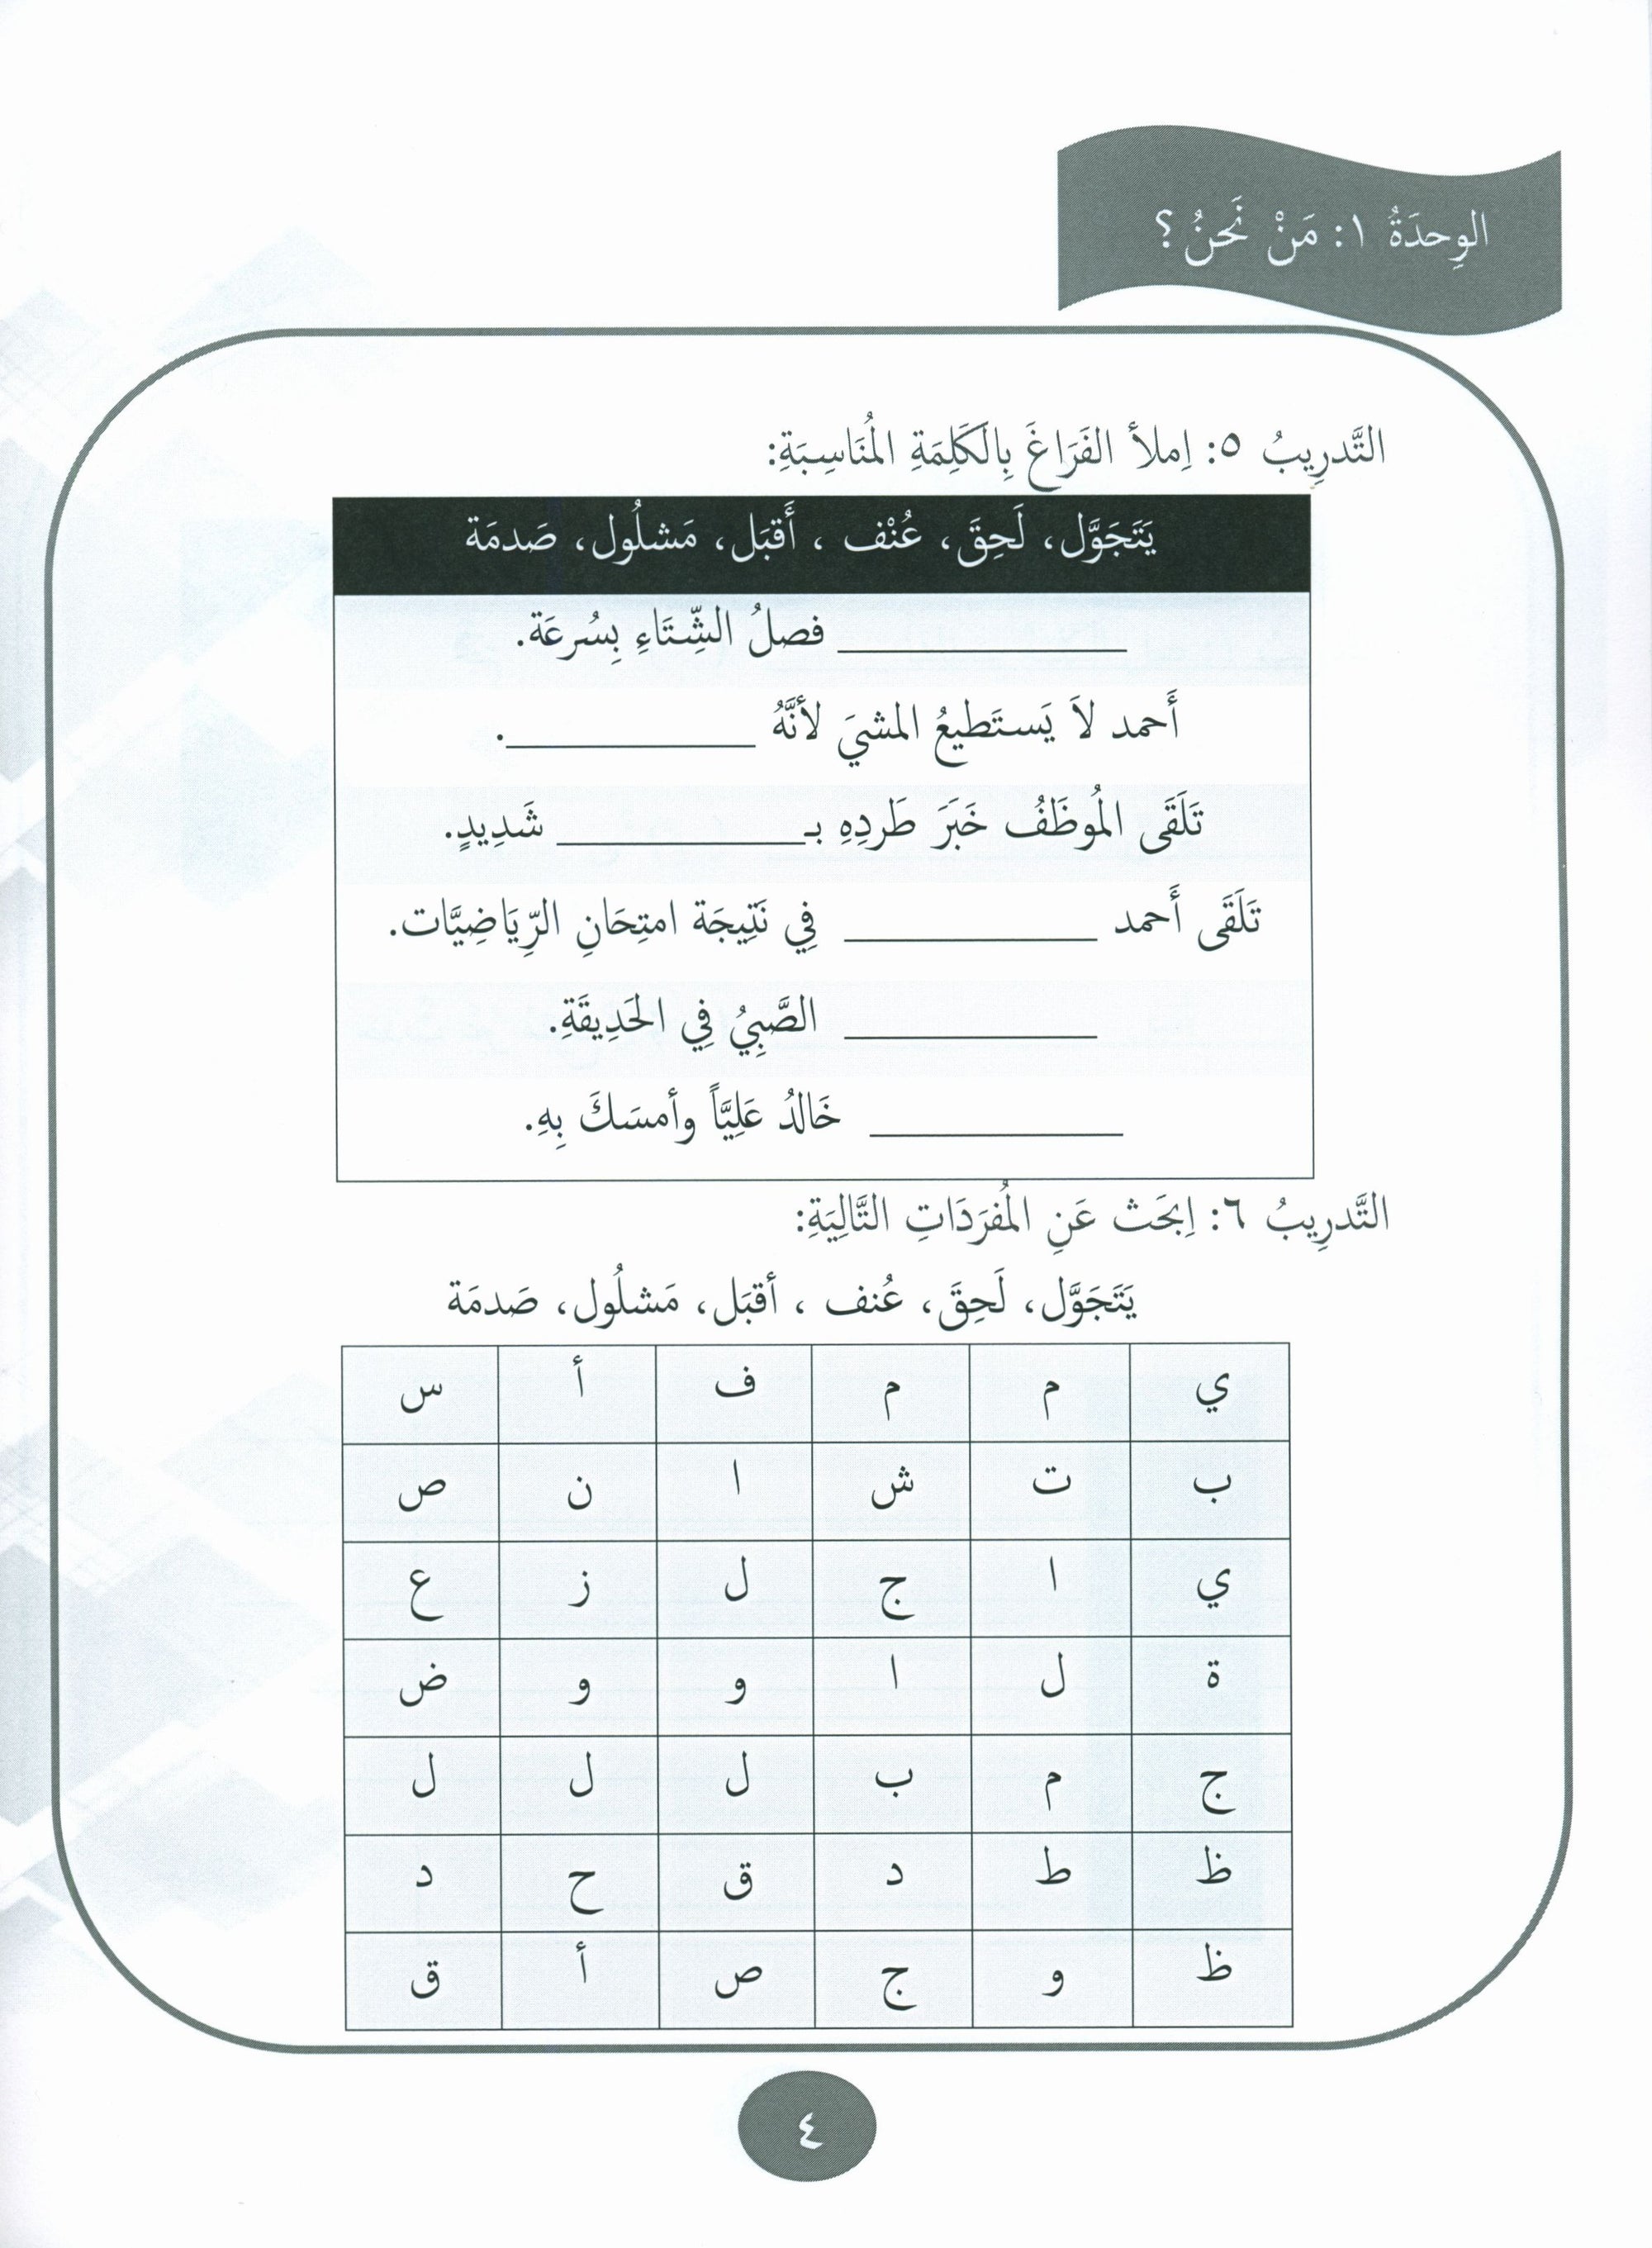 Our Language Is Our Pride Practice Level 8 لغتنا فخرنا